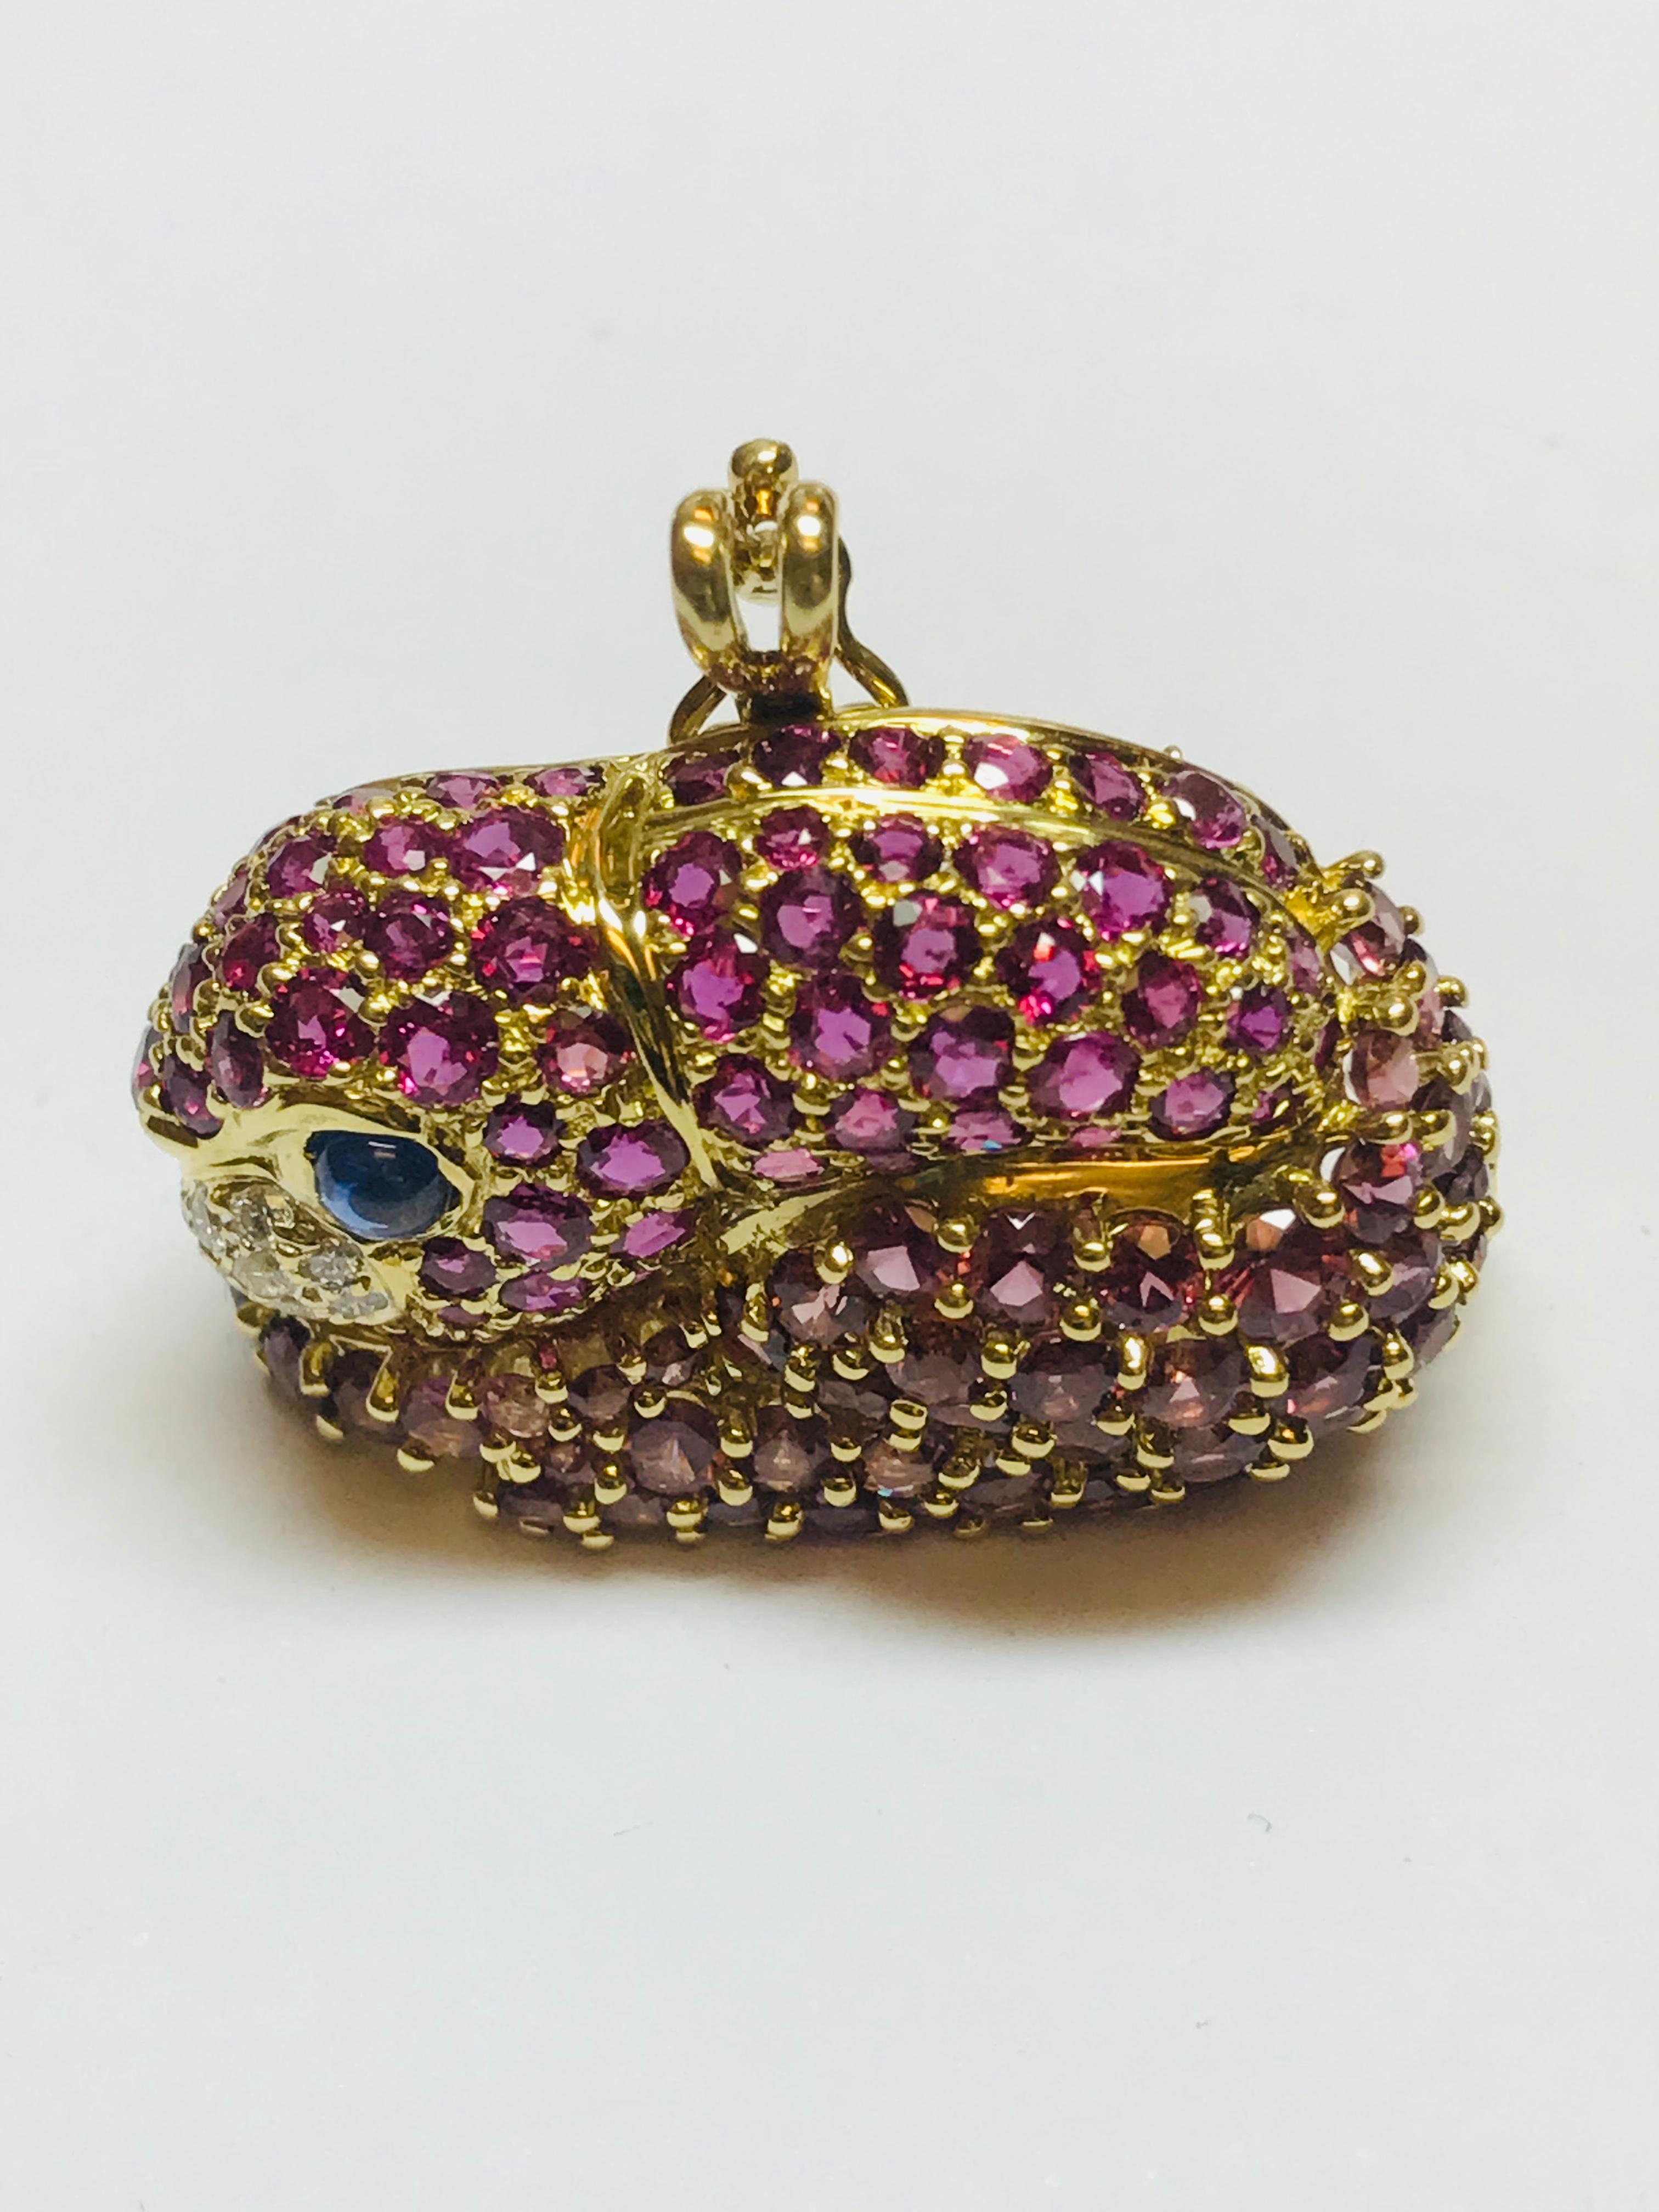 This very unique combination of Pink Garnets on the bottom and Rubies on the top subtly show this precious Rabbit with her ears back. The addition of diamonds on the nose and a Sapphire eye finish her off exquisitely. There are 3.70 carats of Pink